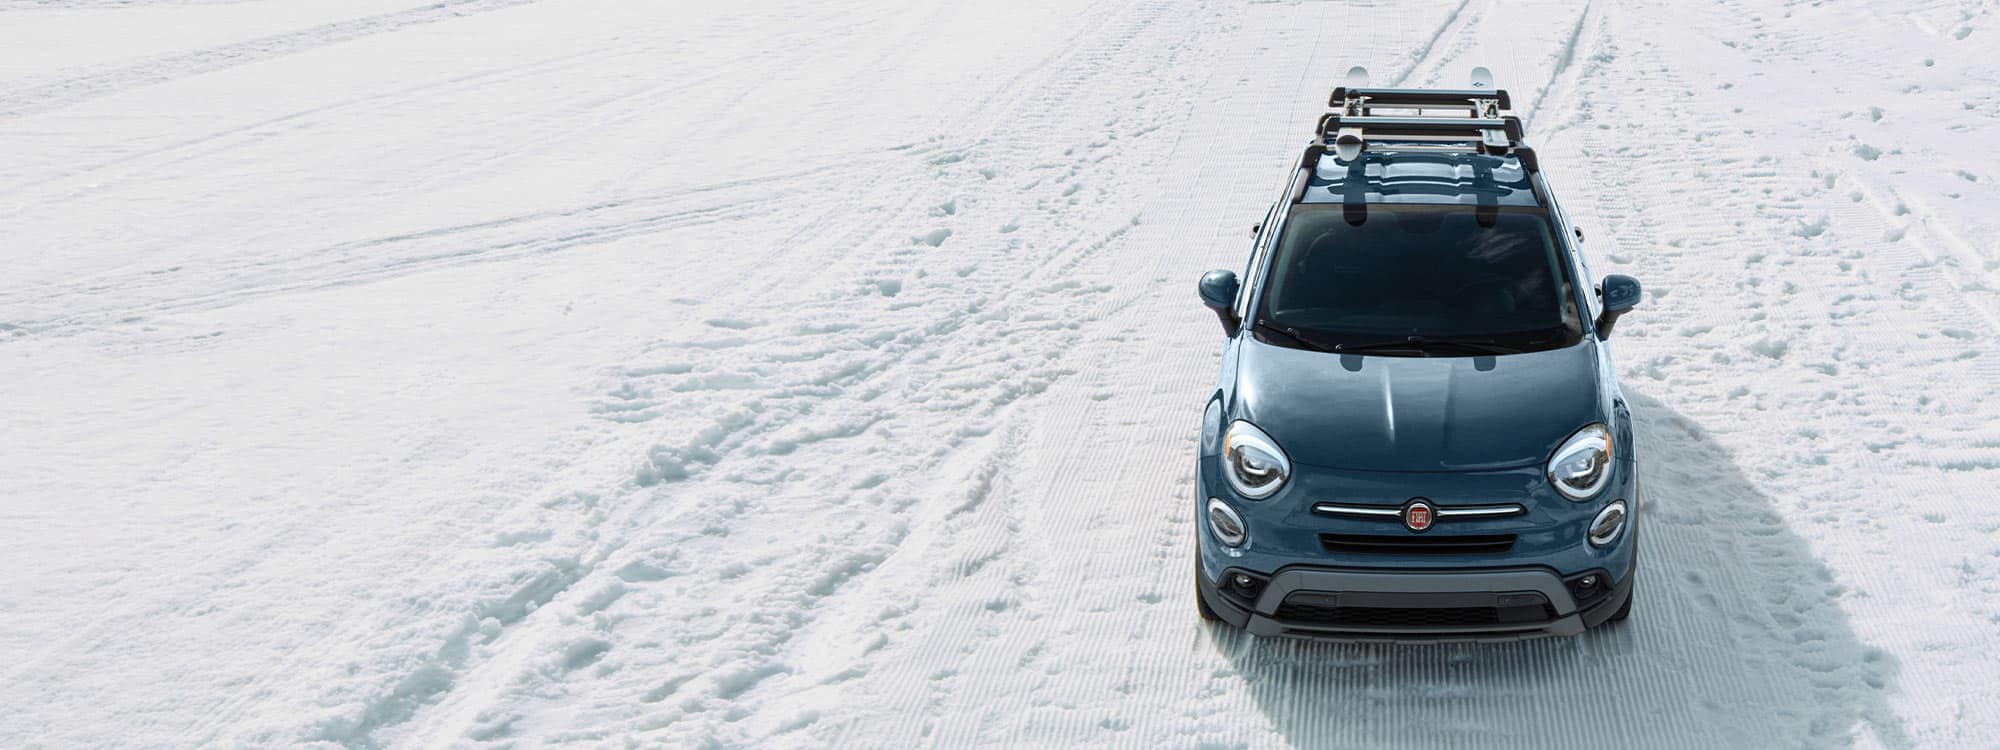 A raised, head-on view of a 2021 Fiat 500X Trekking with aftermarket equipment, being driven through snow.